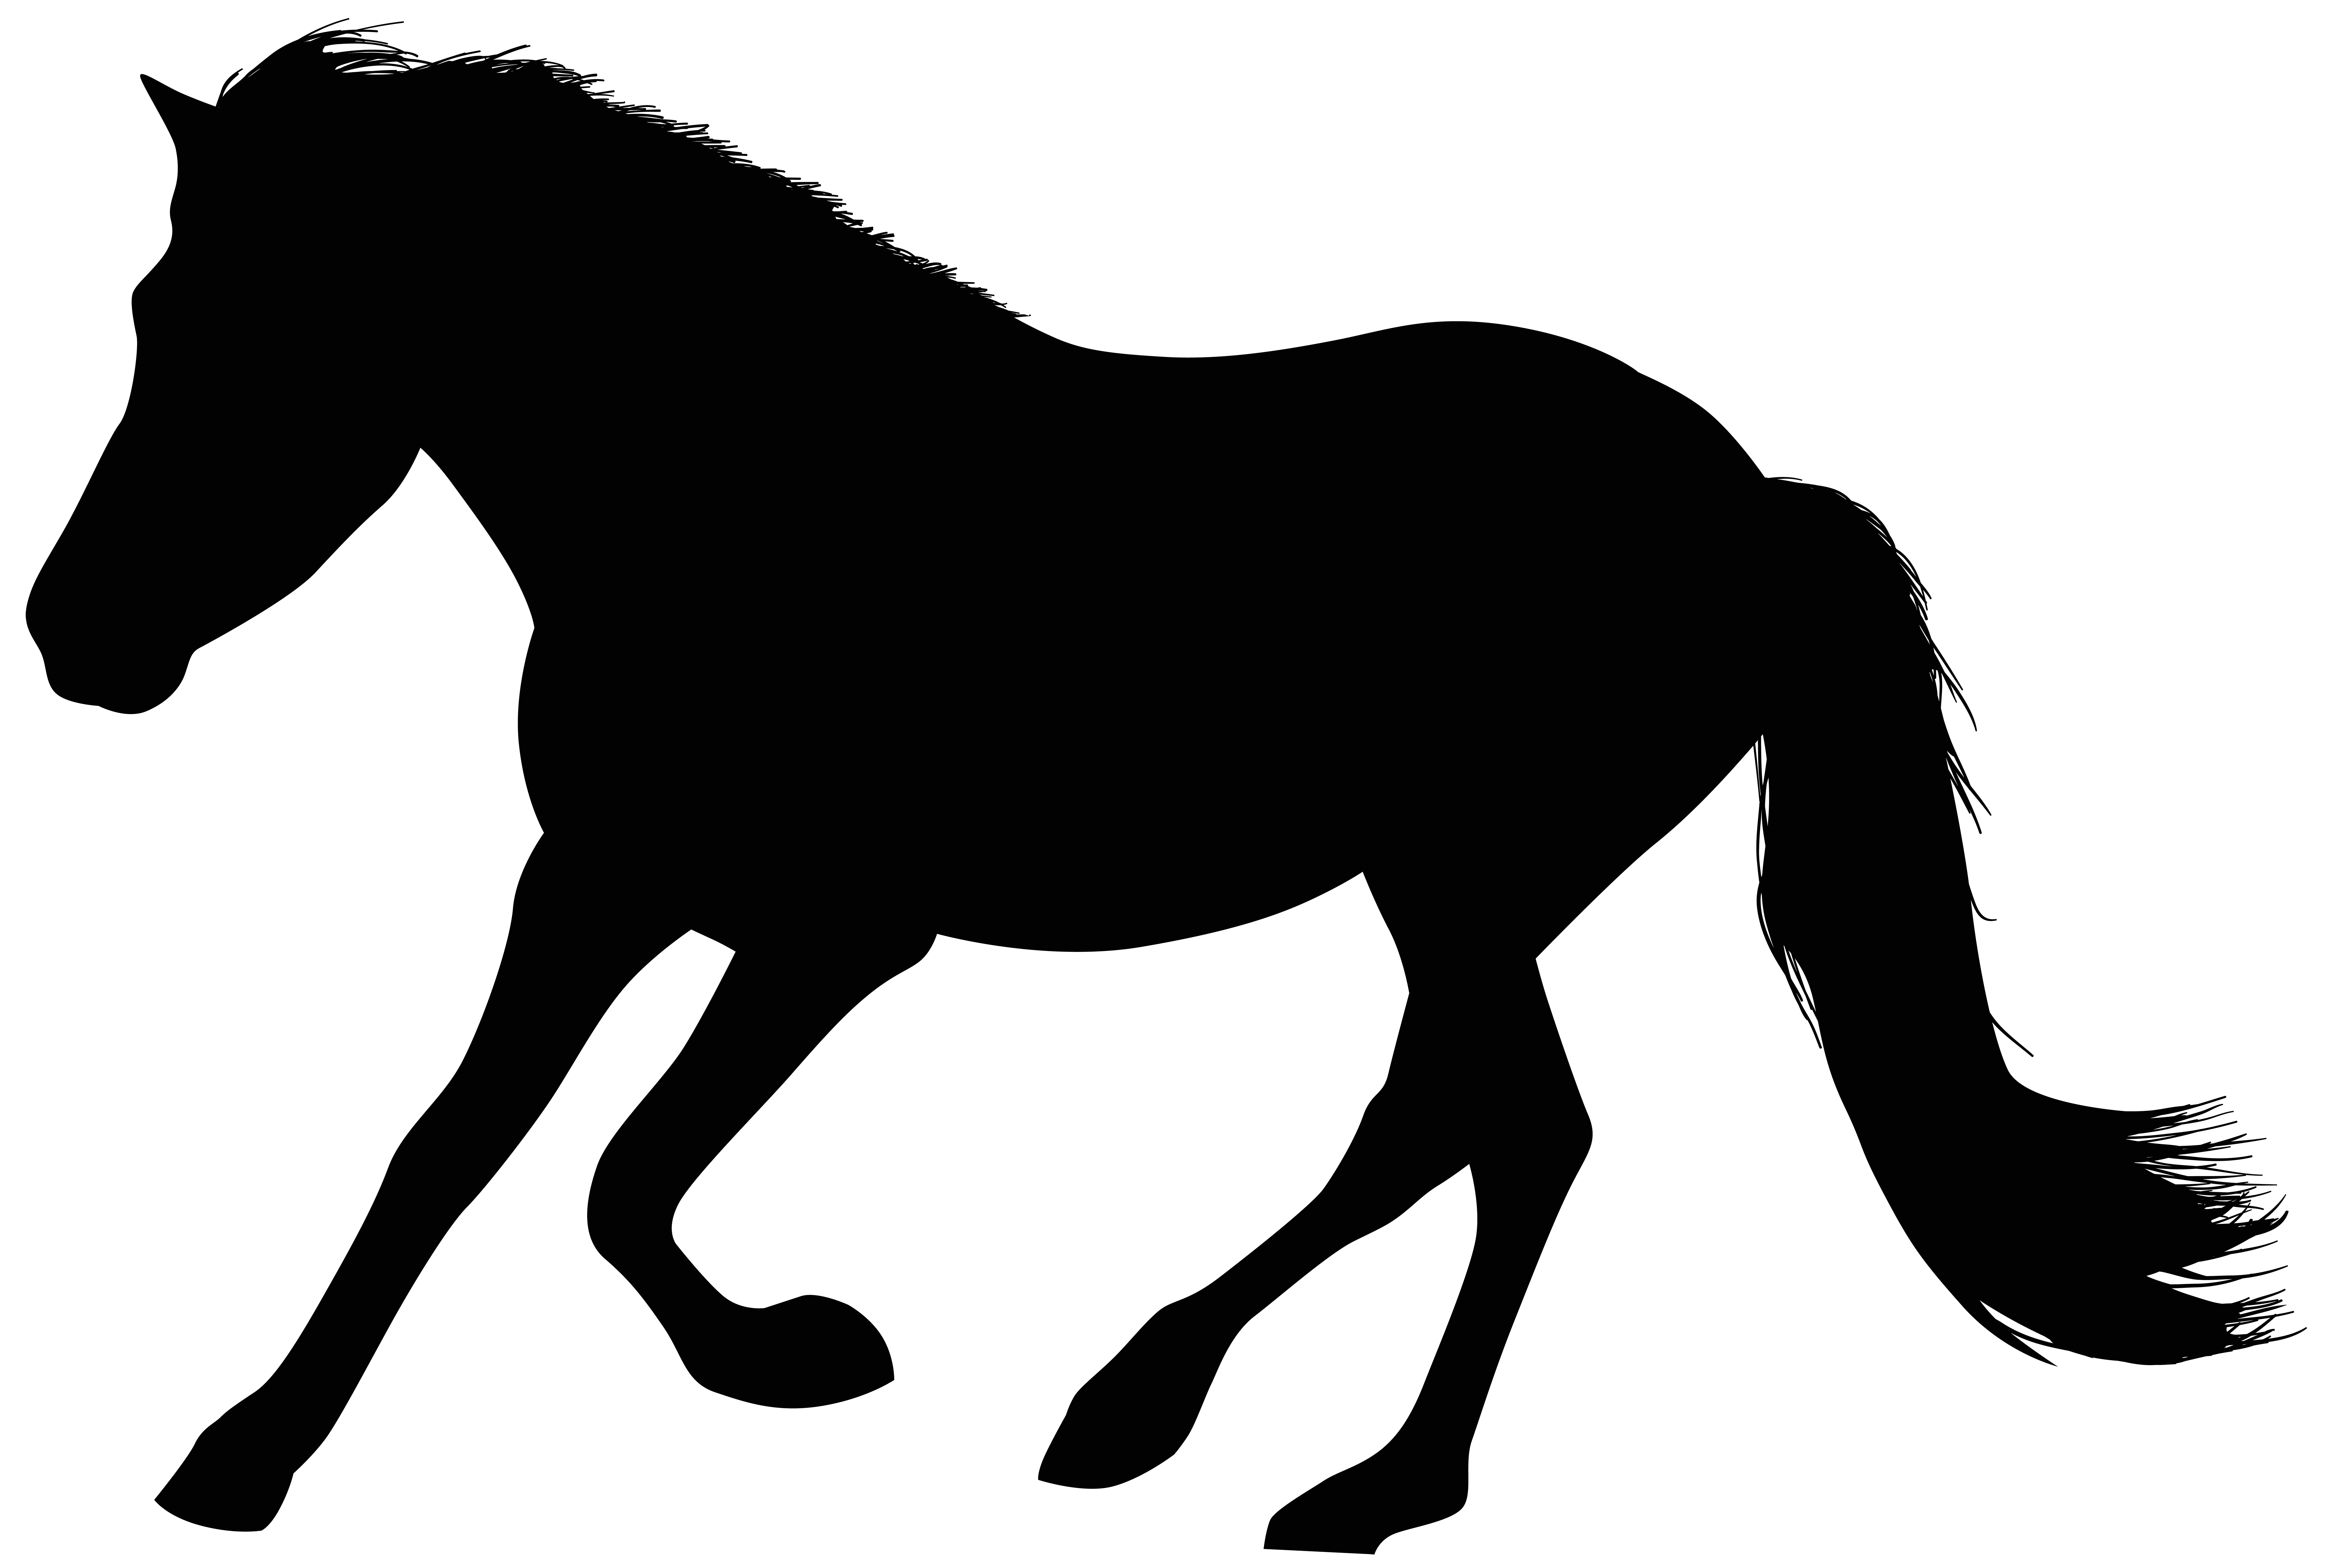 Running horse silhouette at. Horses clipart cross country